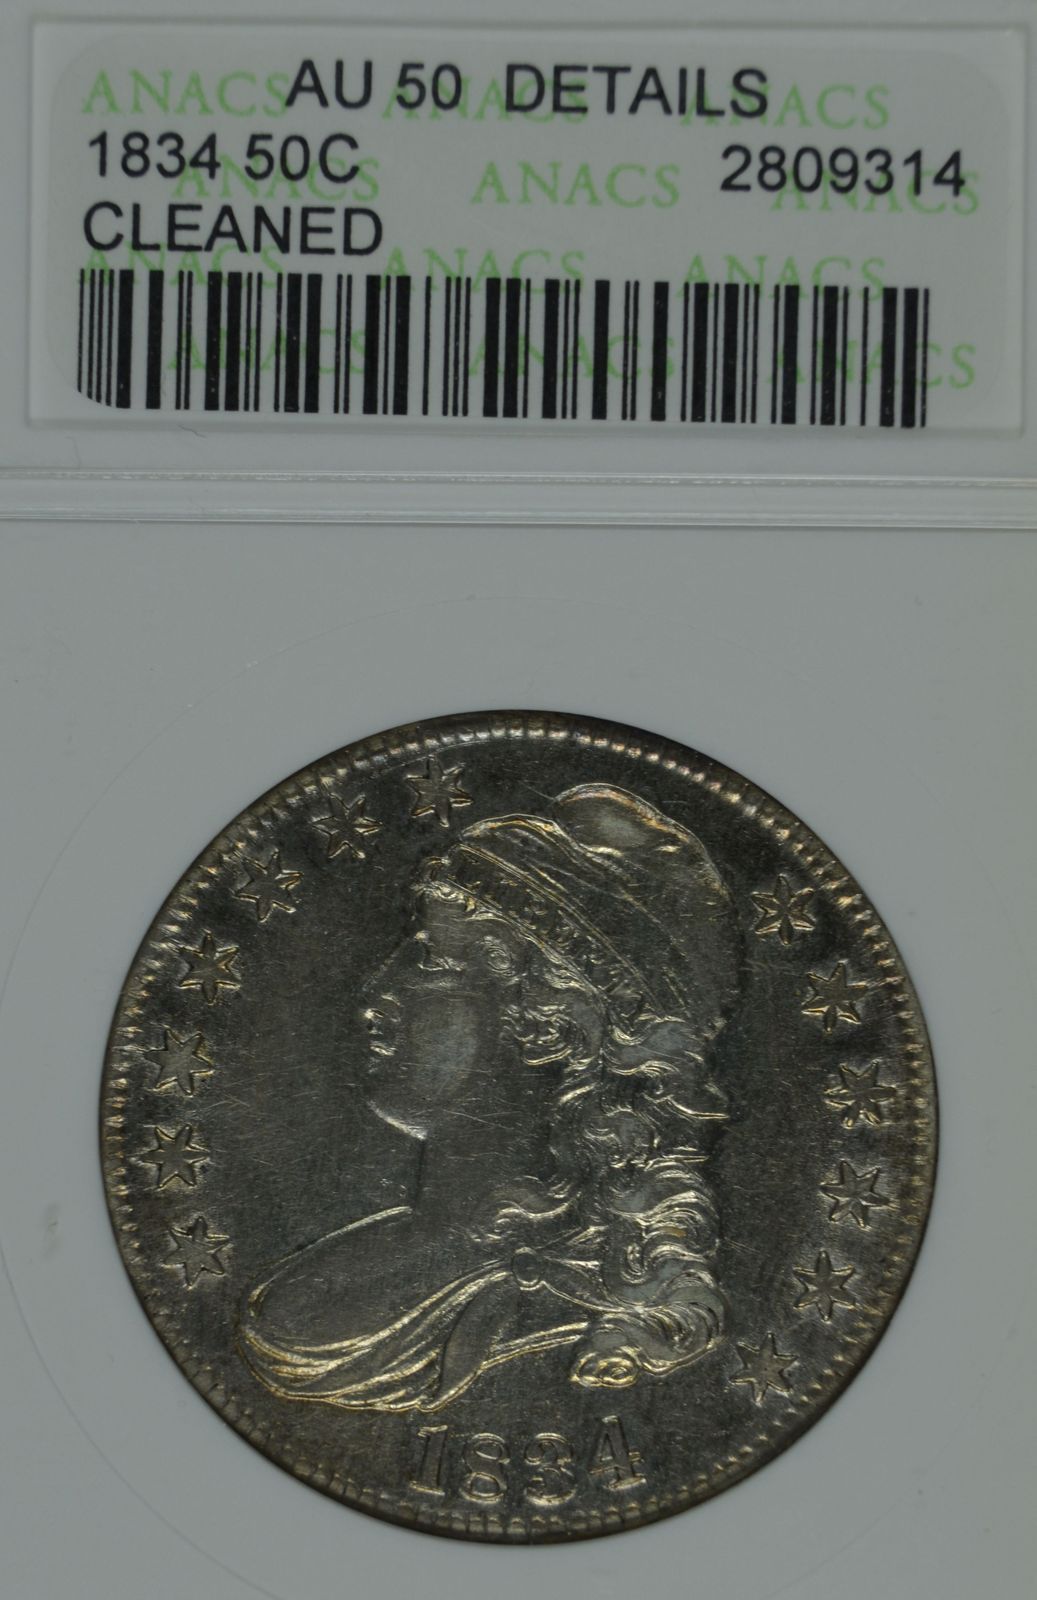 Primary image for 1834 Capped Bust circulated silver half dollar ANACS AU 50 details Cleaned